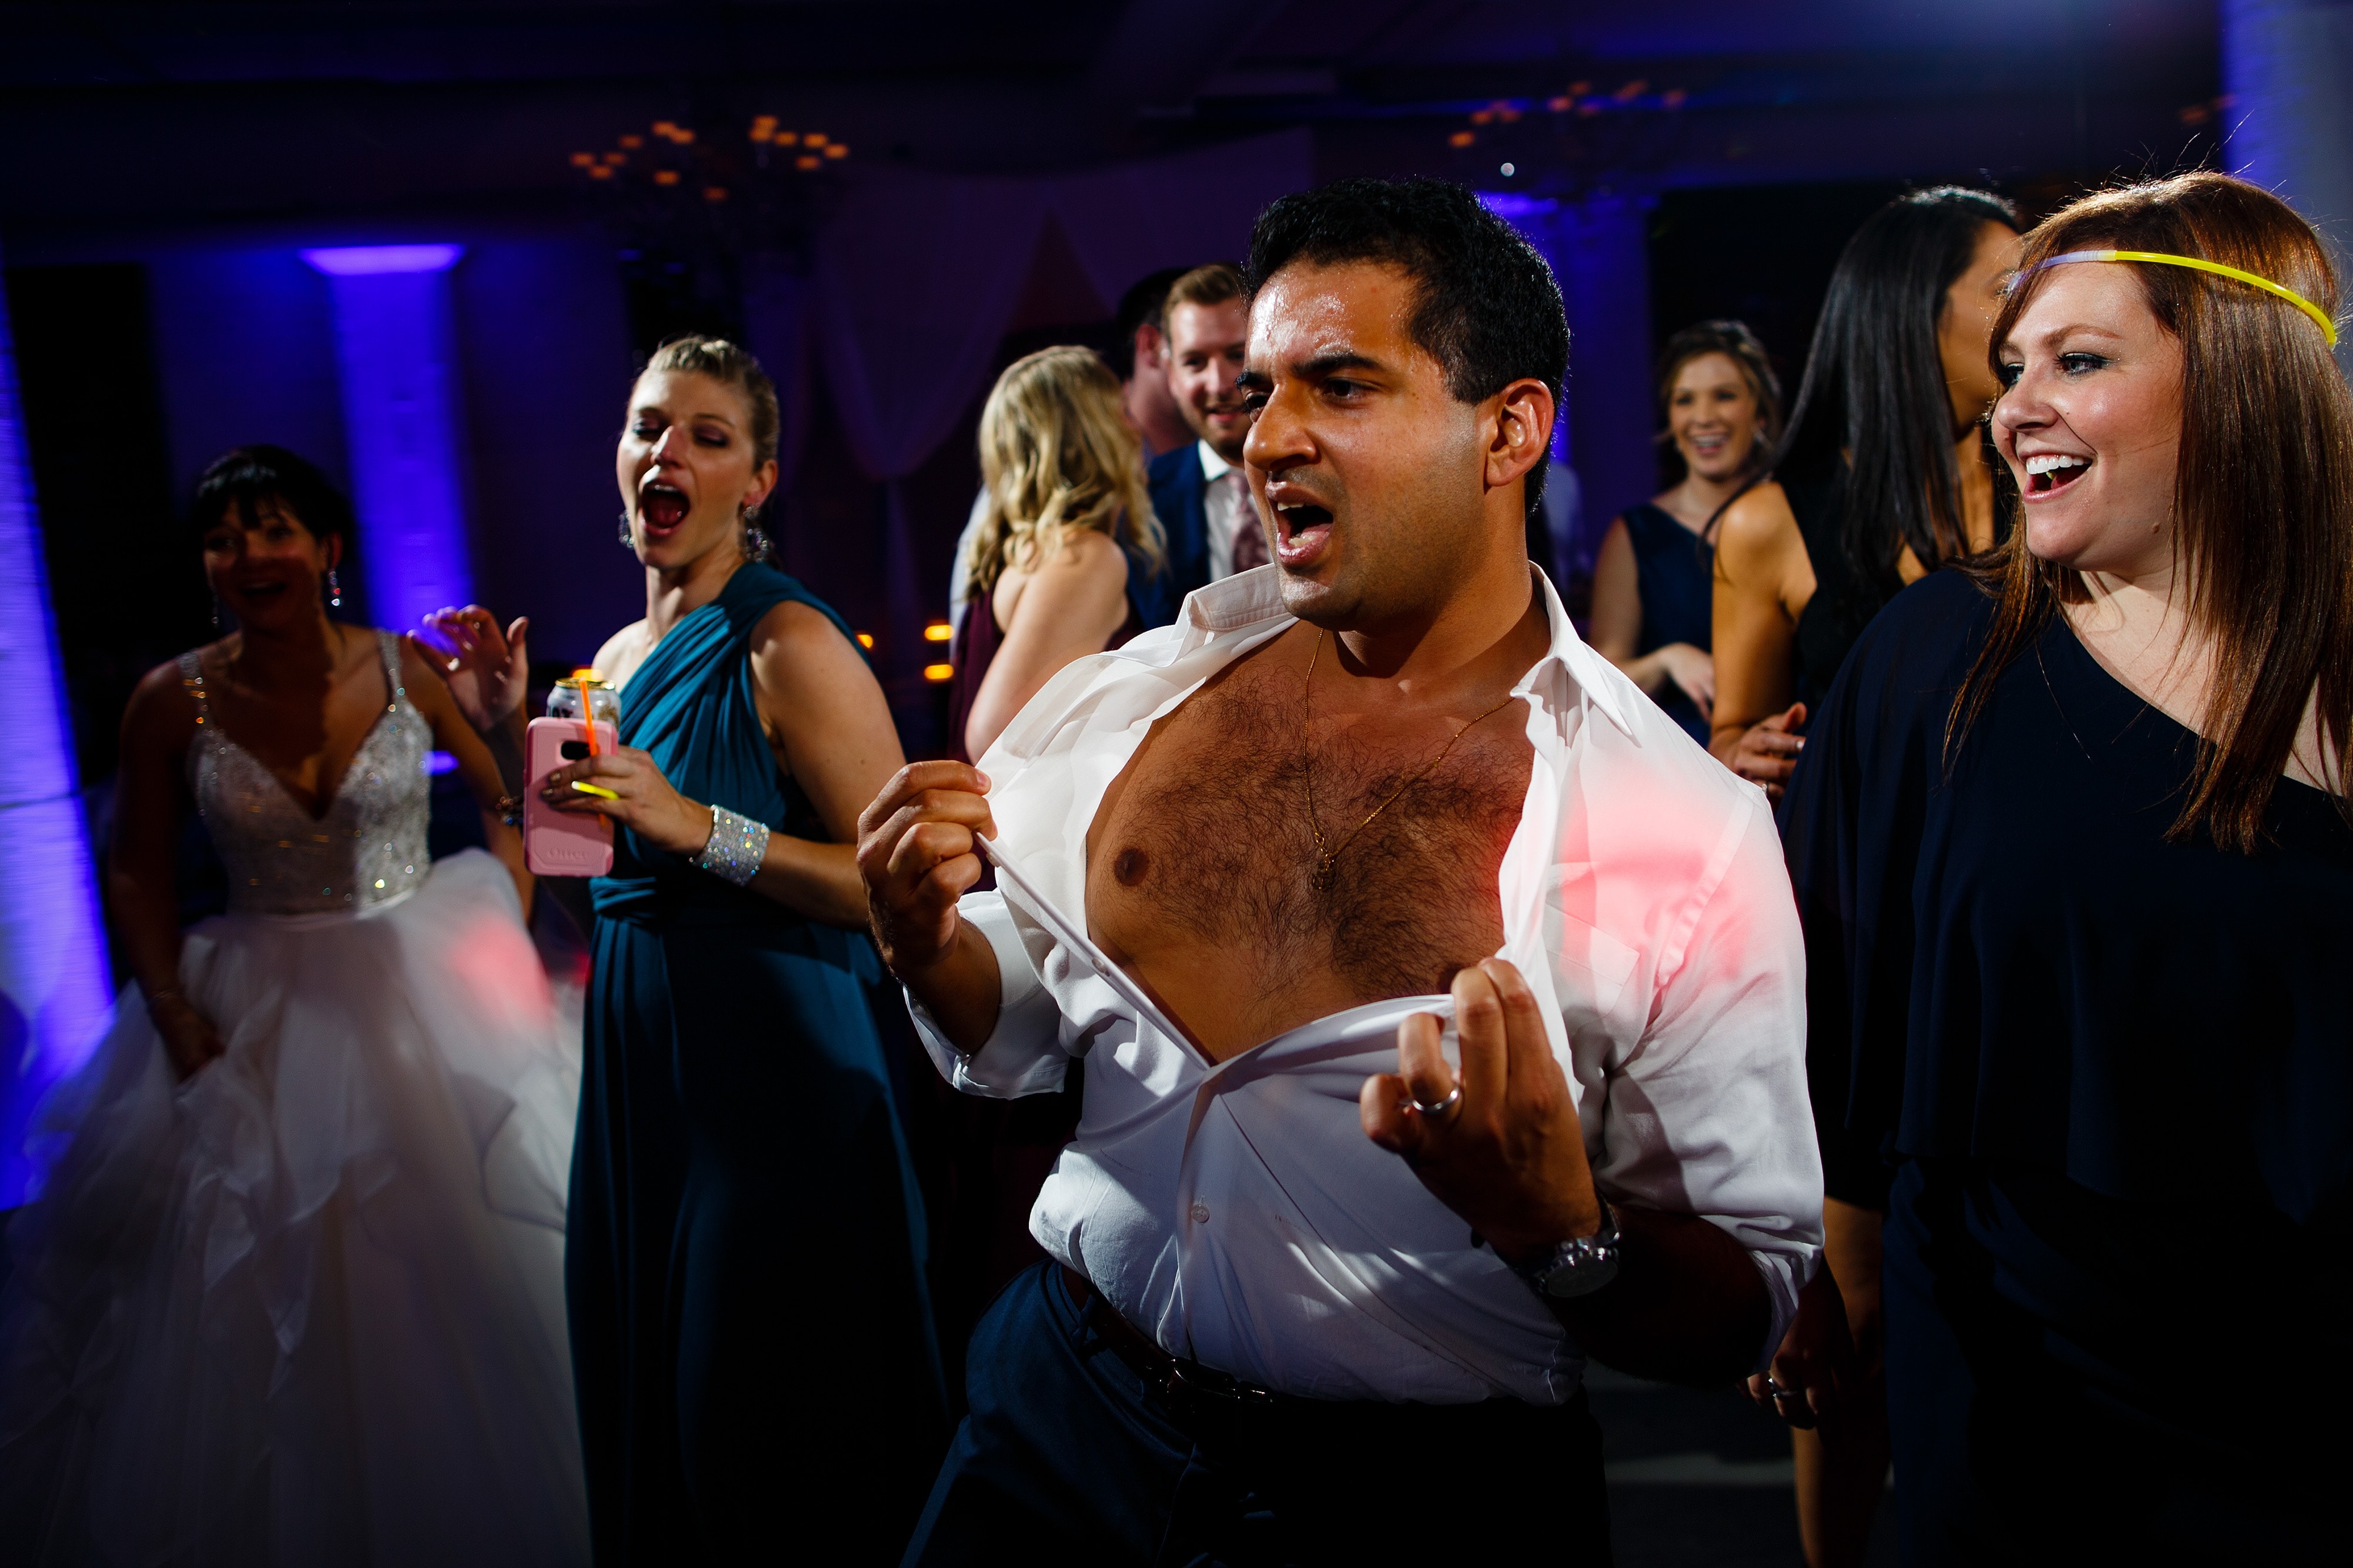 Guests dance during a wedding at Room 1520